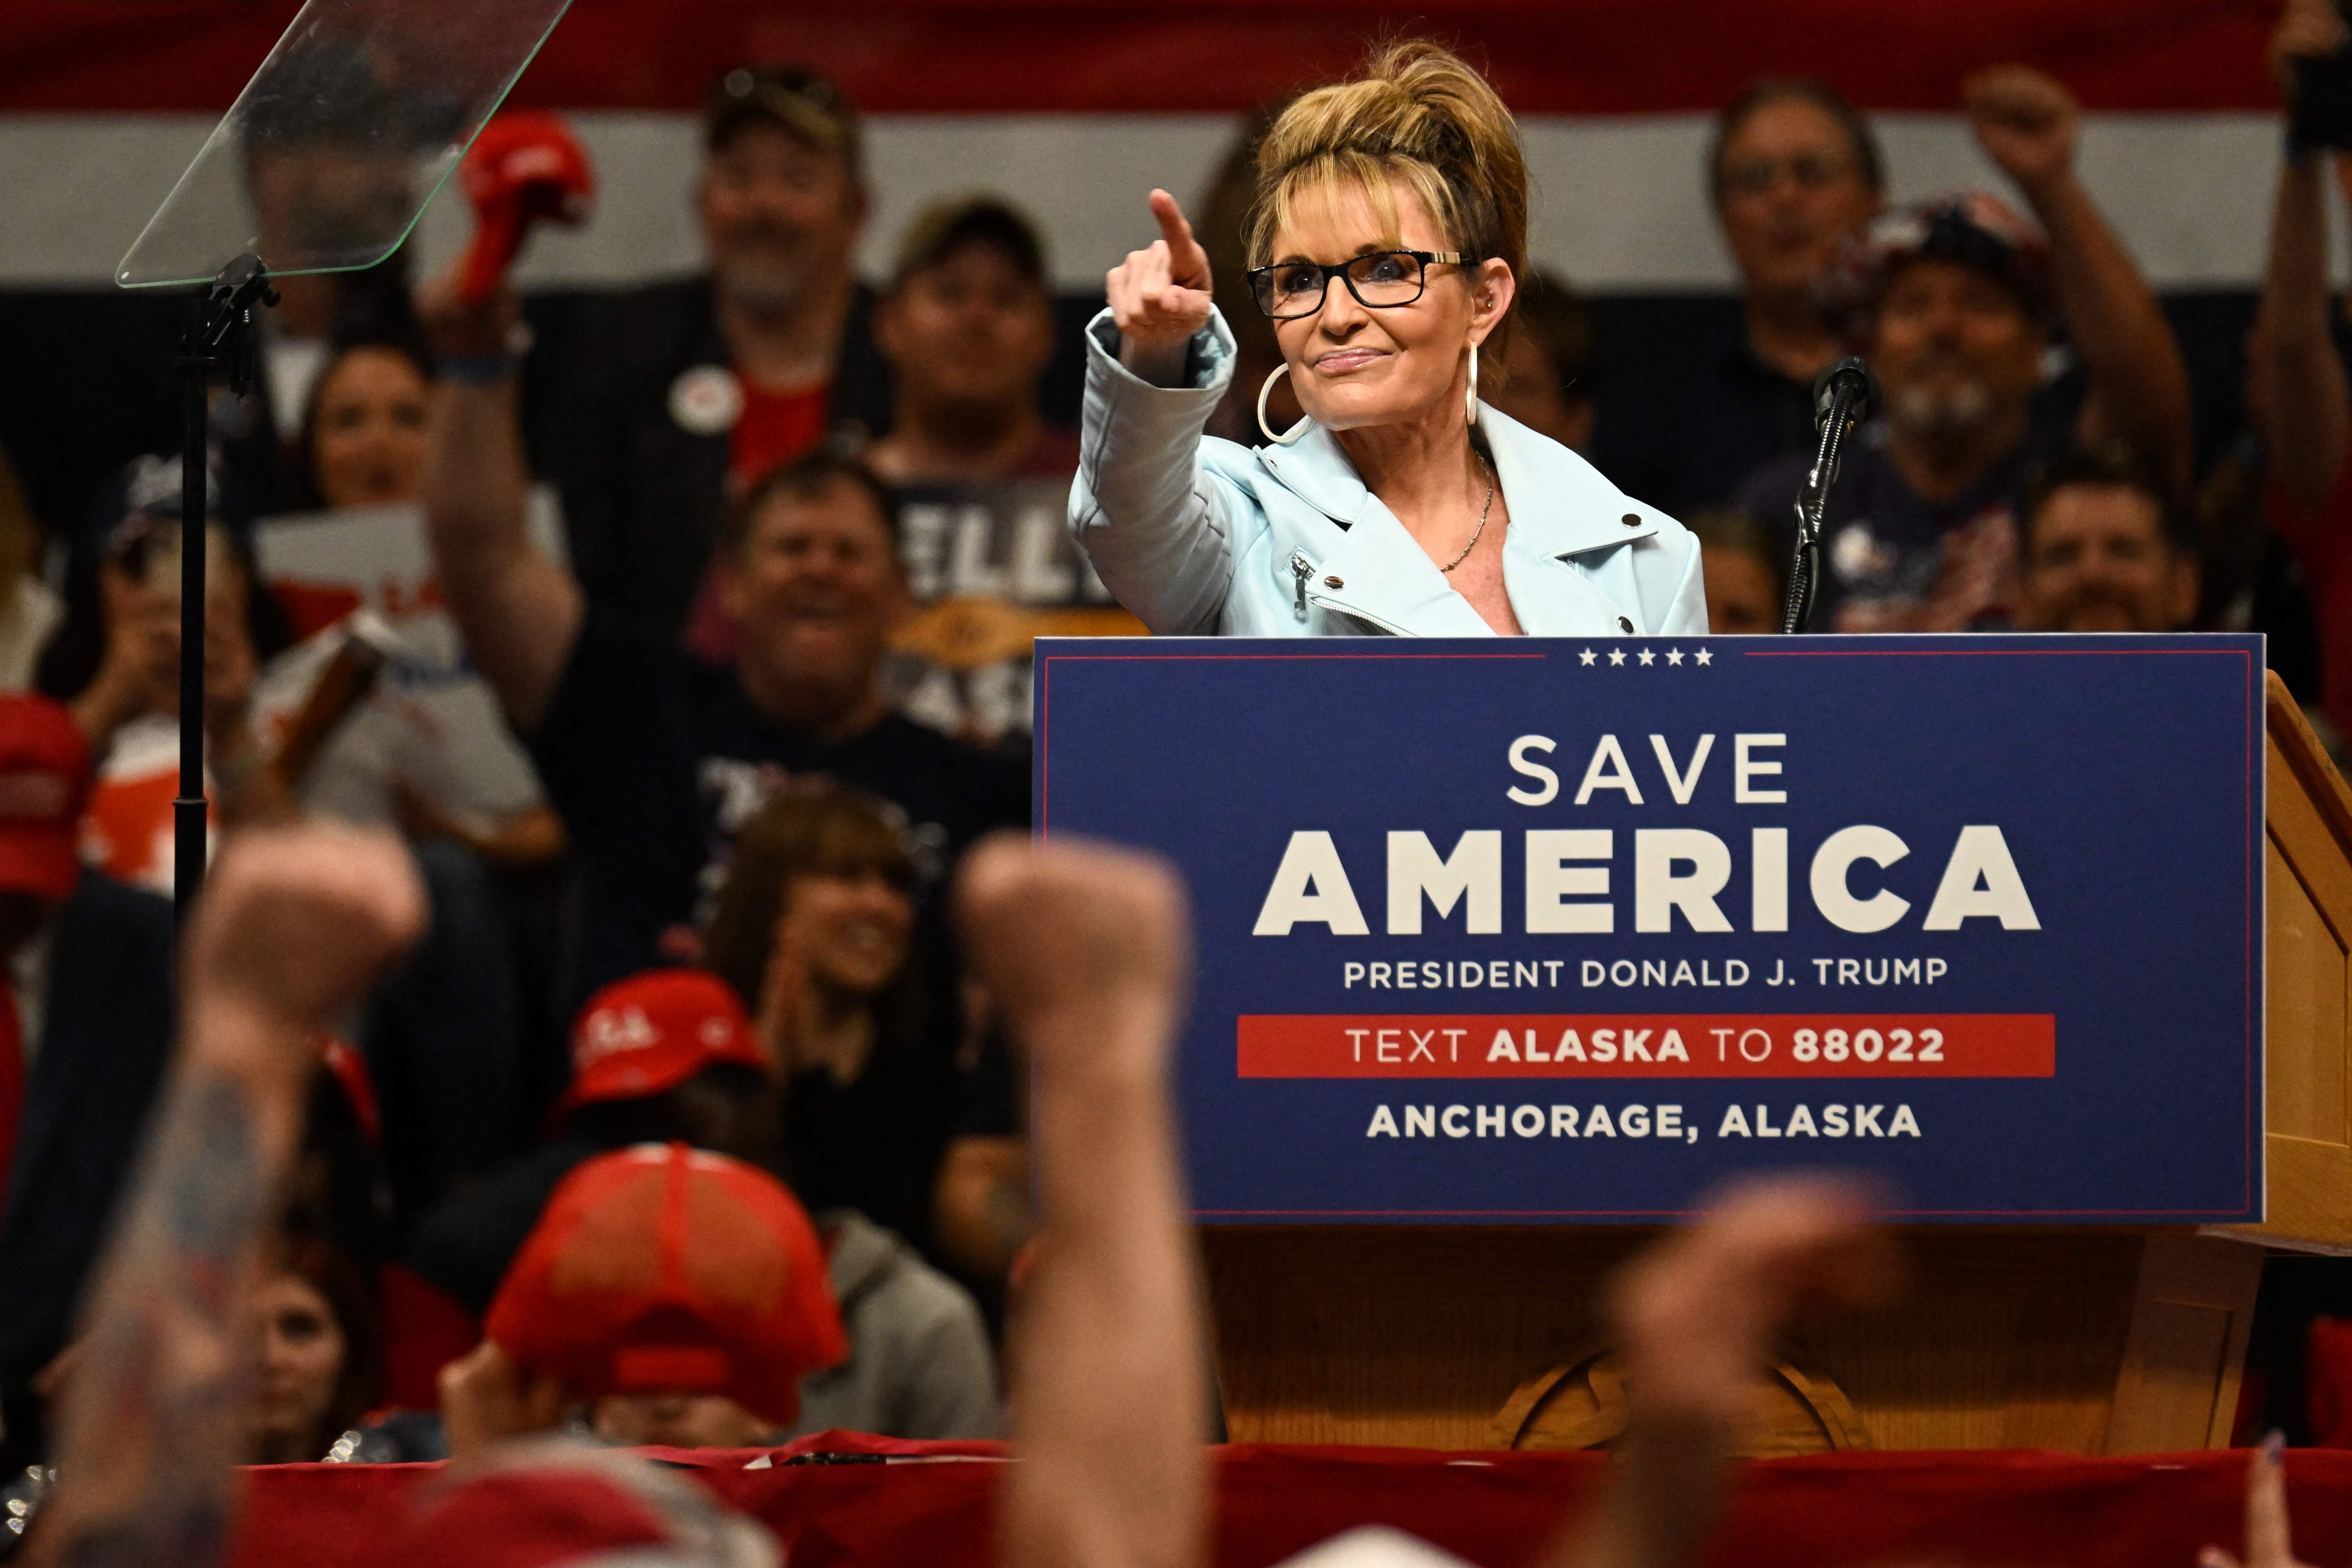 Sarah Palin speaks on stage during a Save America rally before former US President Donald Trump in Anchorage, Alaska on July 9, 2022